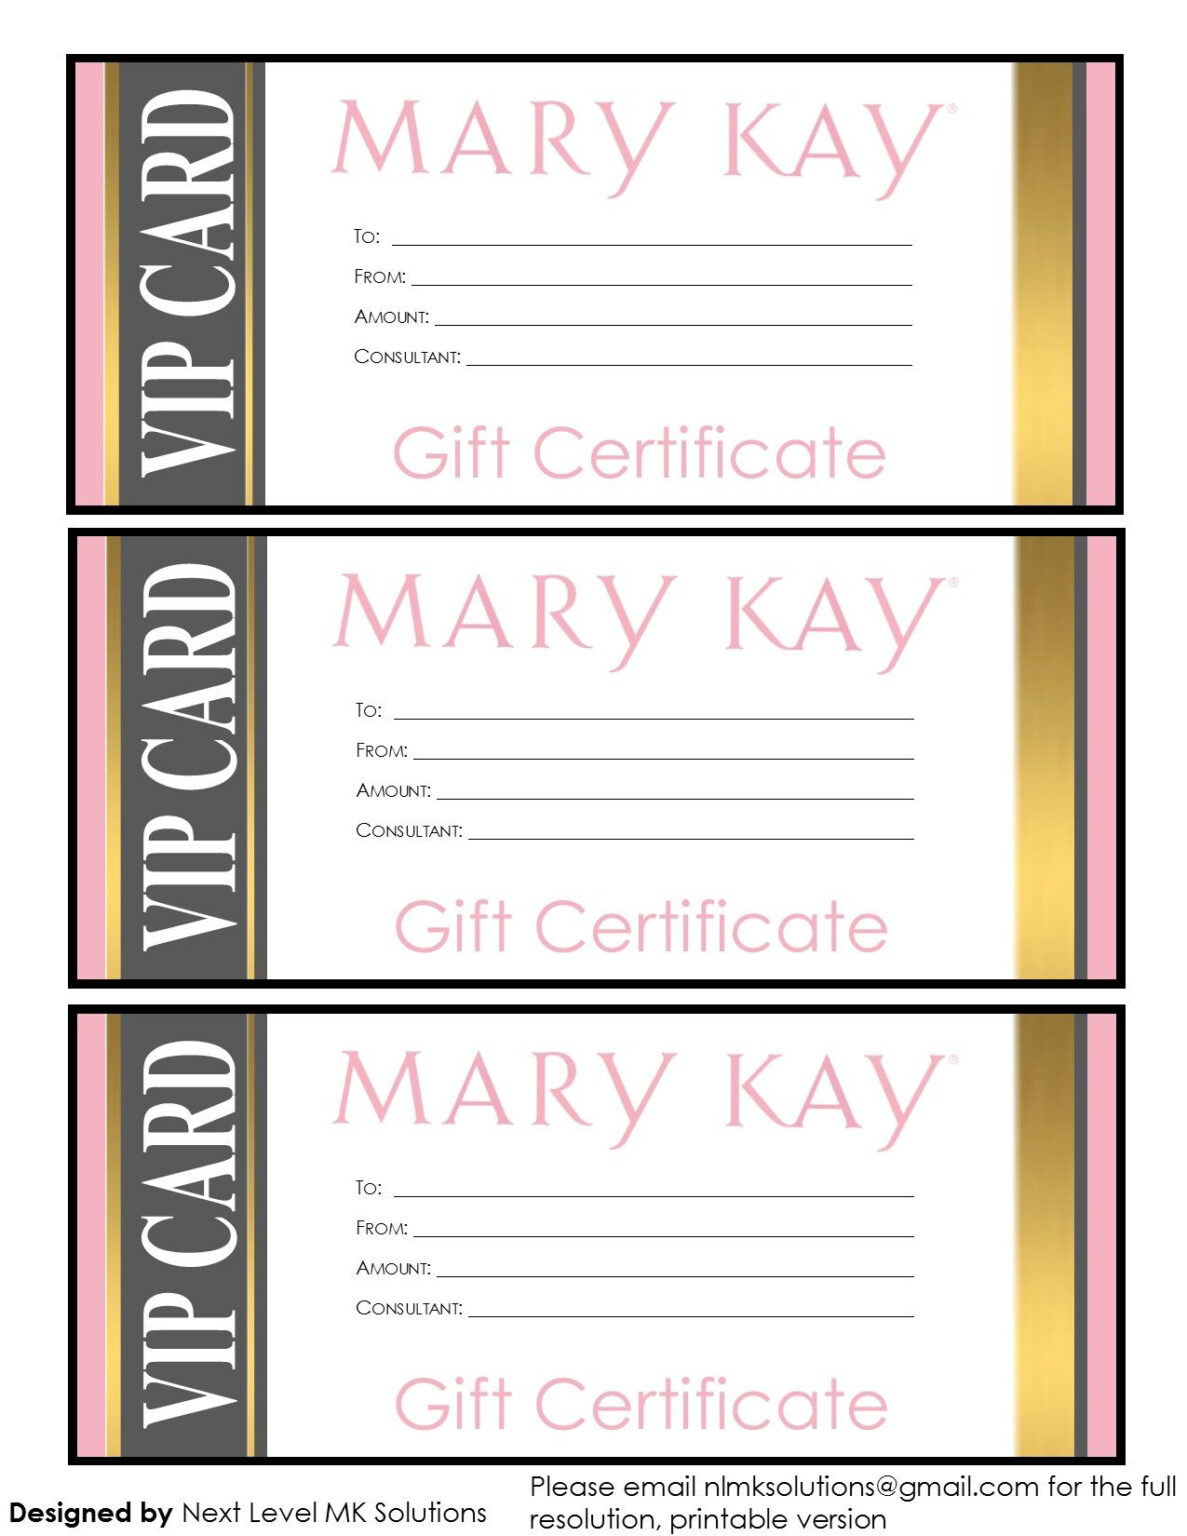 Mary Kay Gift Certificate Template Douglasbaseball Inside Mary Kay Gift Certificate Template